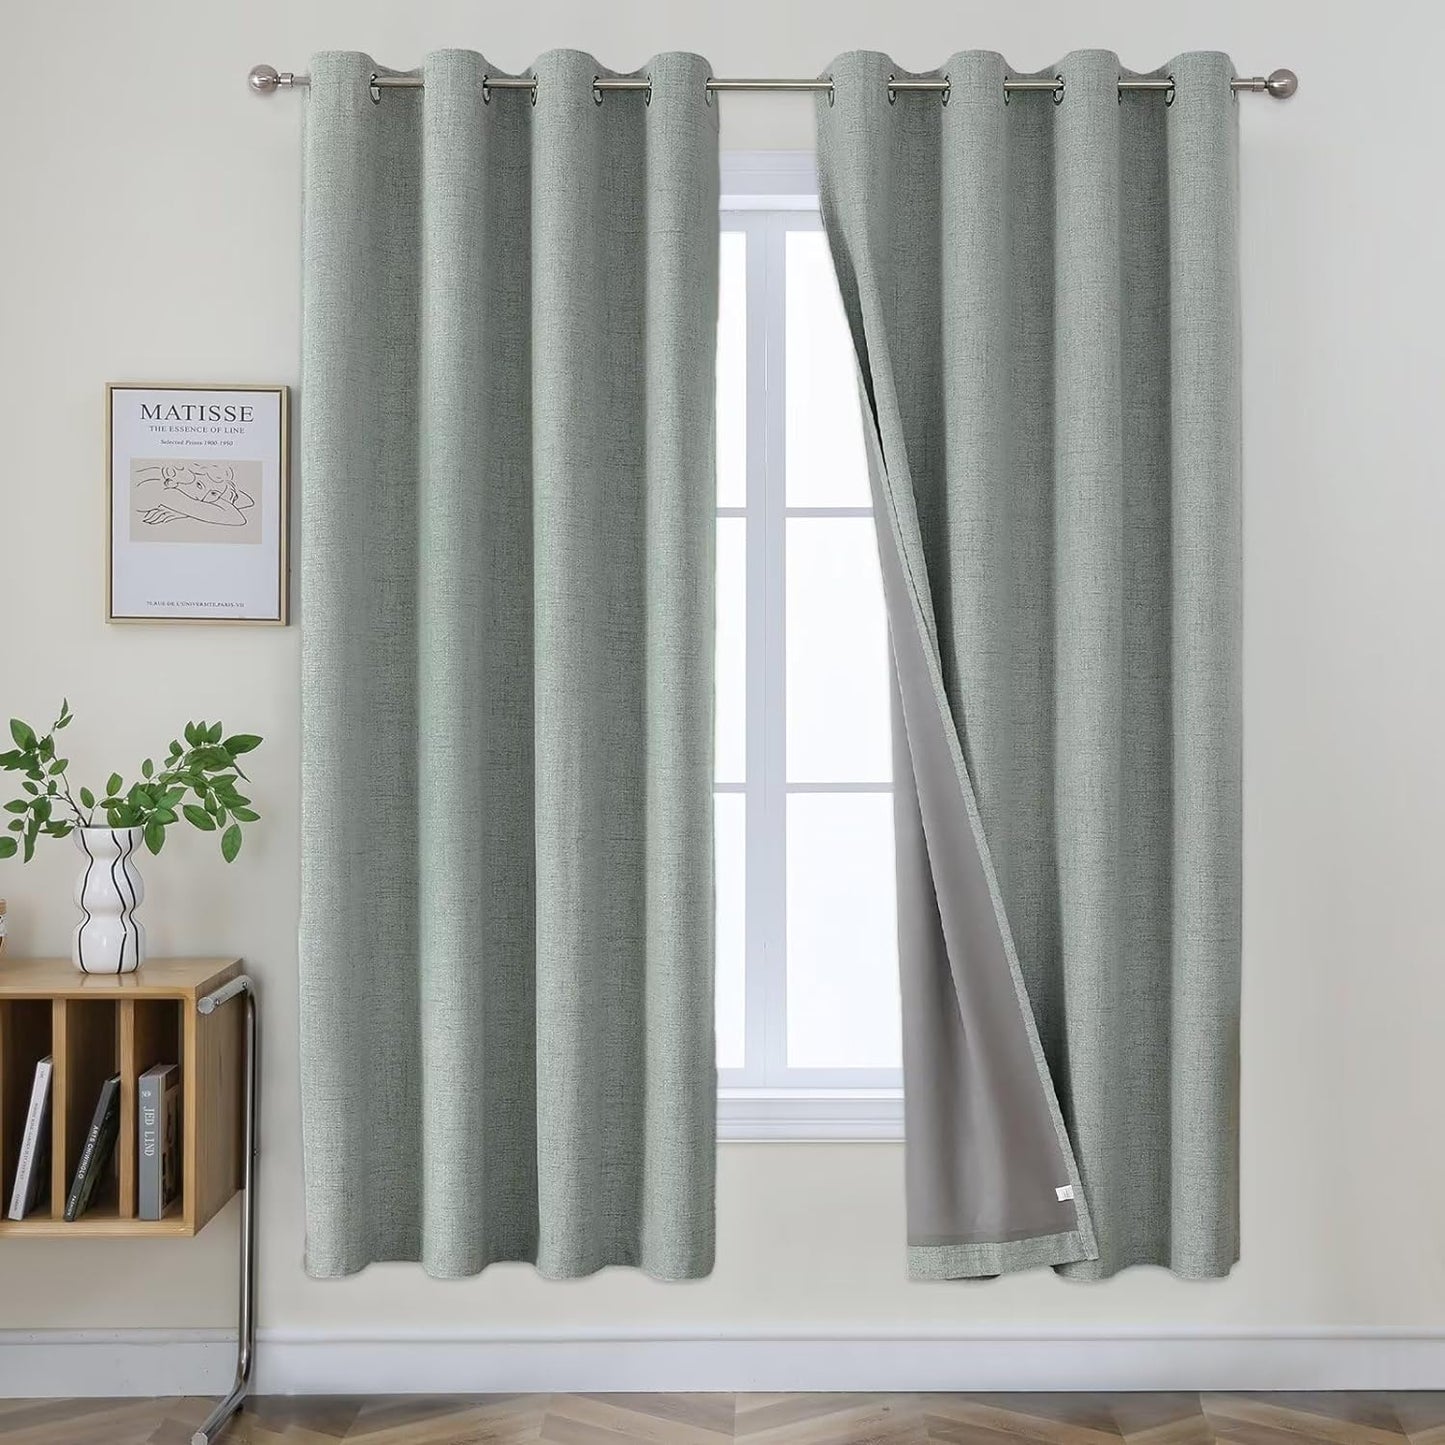 Joydeco Black Out Curtains 63 Inch Long, Curtains 63 Inch Length Textured Thermal Grommets Curtains, Room Darkening Curtains 63 Inches Long for Living Room Bedroom, (42X63 Inch, Greyish White)  Joydeco   